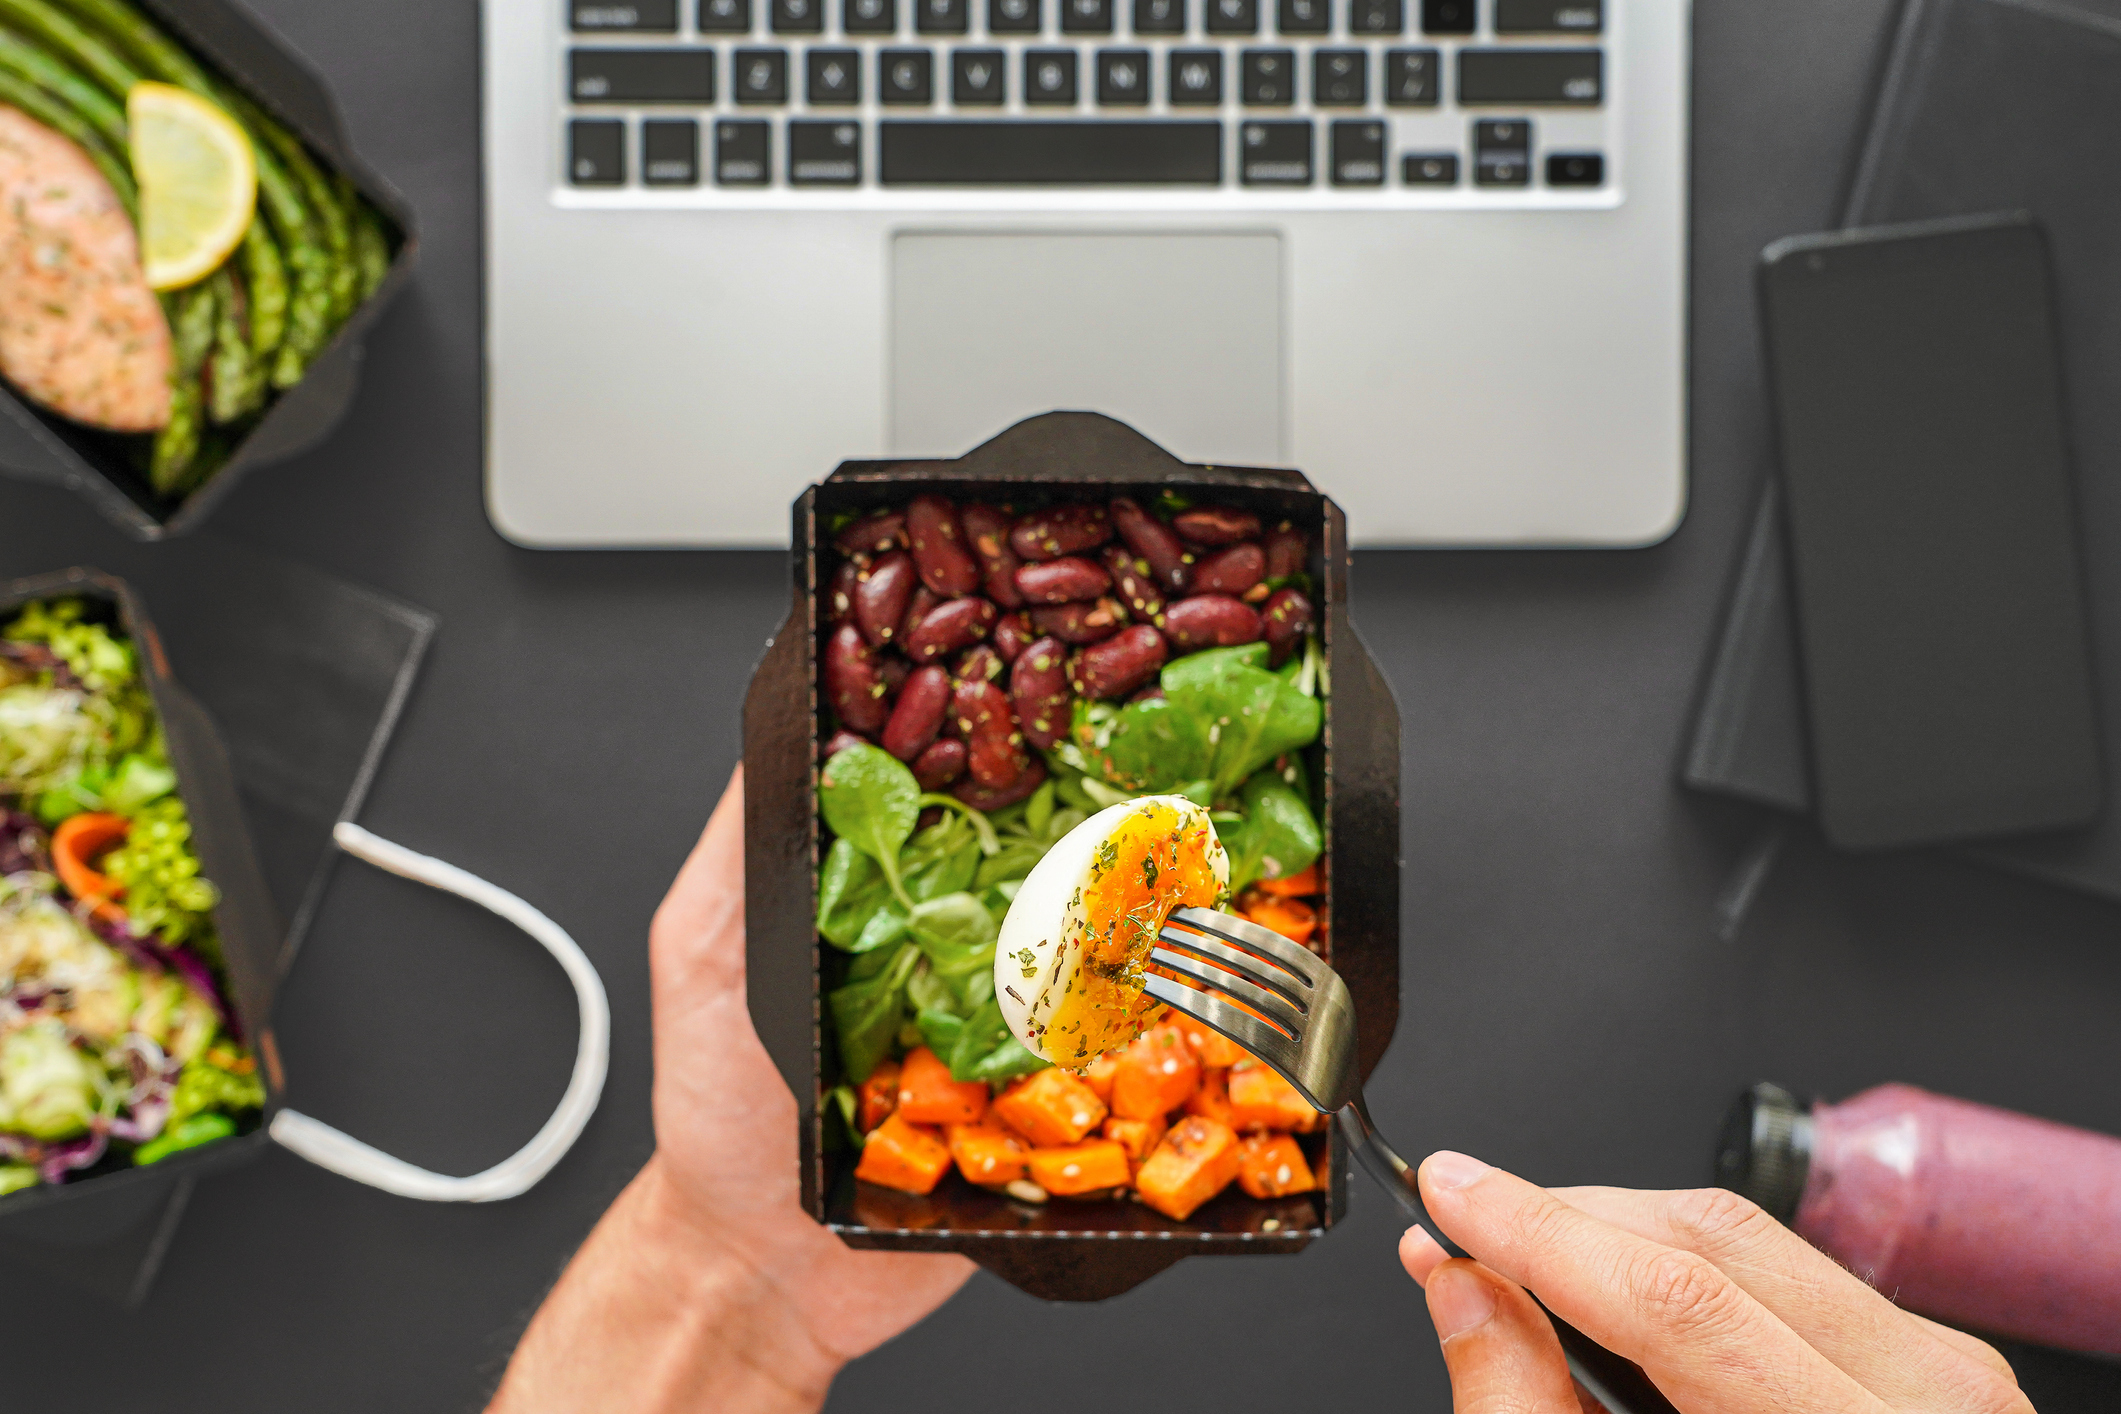 Hands hold a fork with an egg on it from a healthy takeout lunch over a laptop